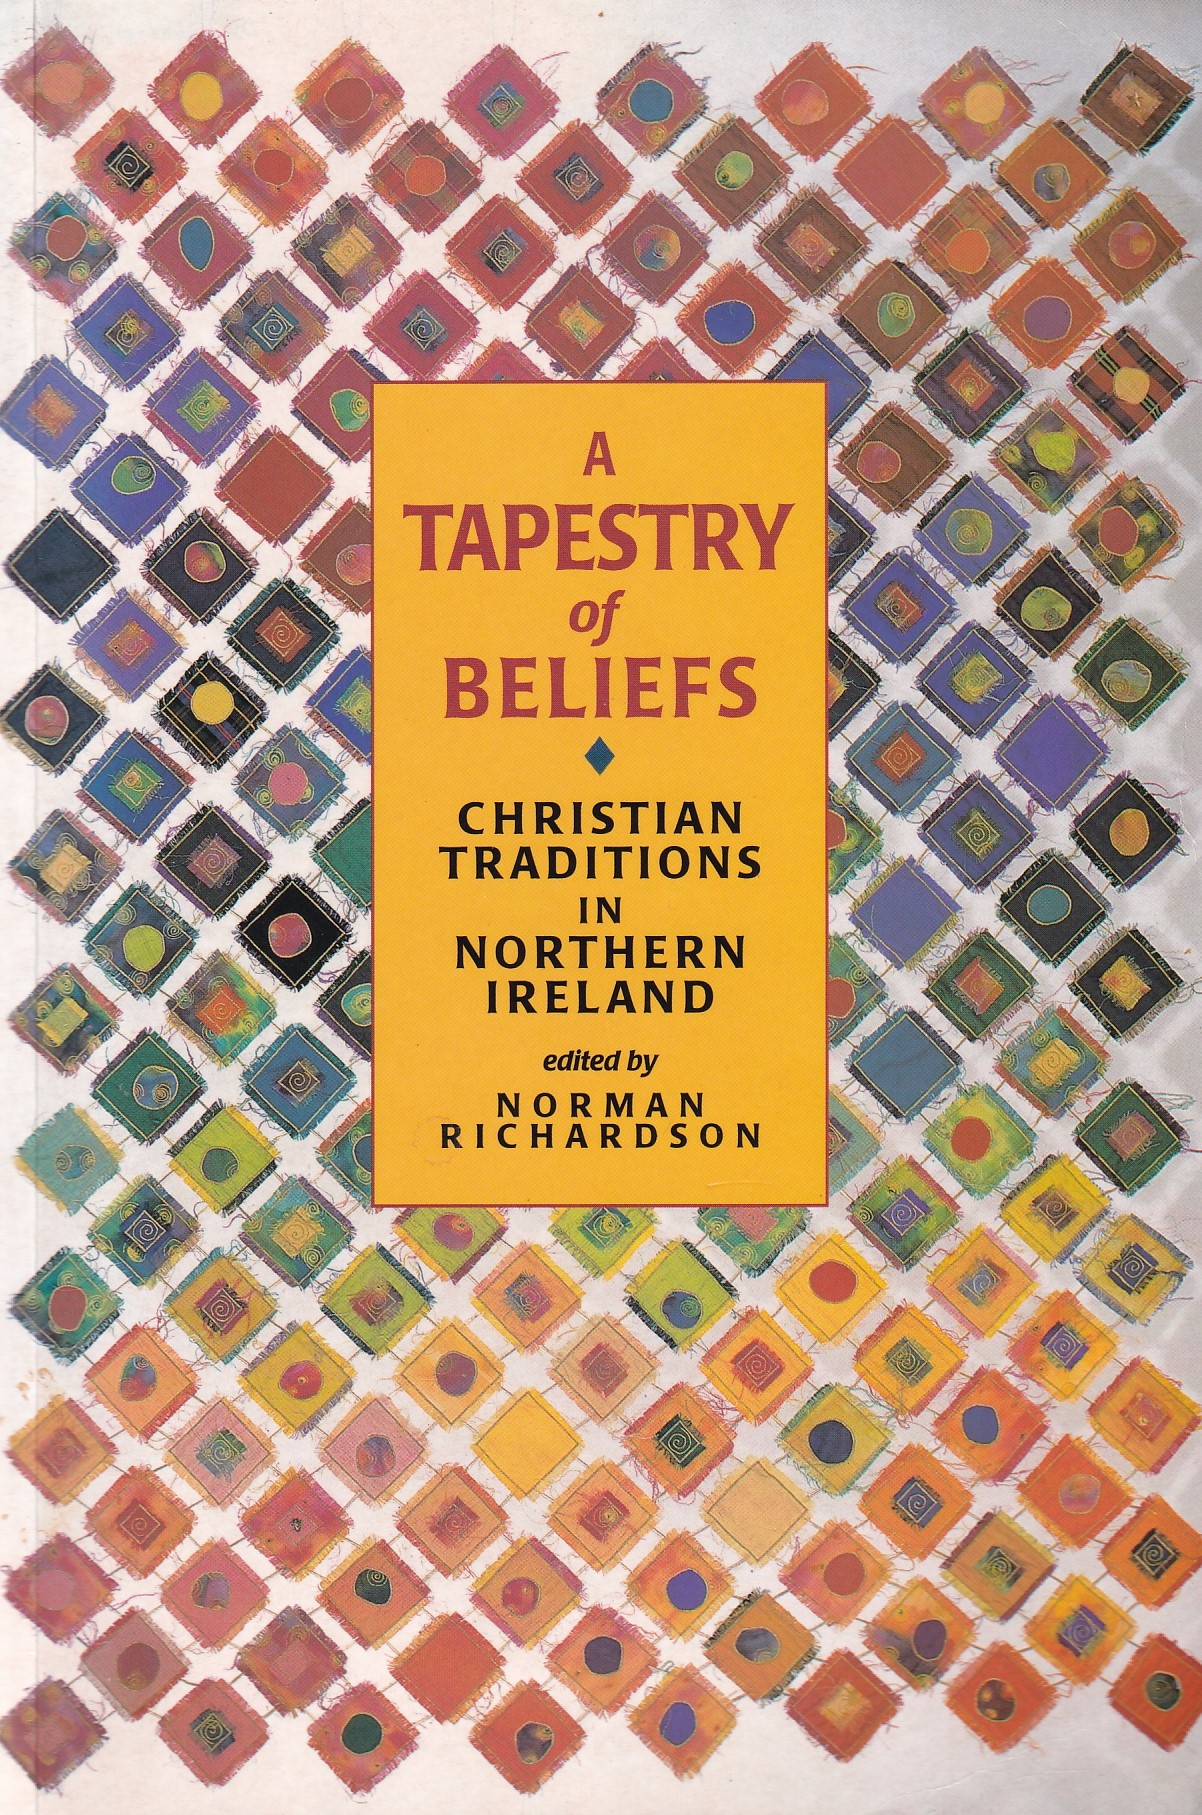 A Tapestry of Beliefs: Christian Traditions in Northern Ireland by Norman Richardson (ed.)